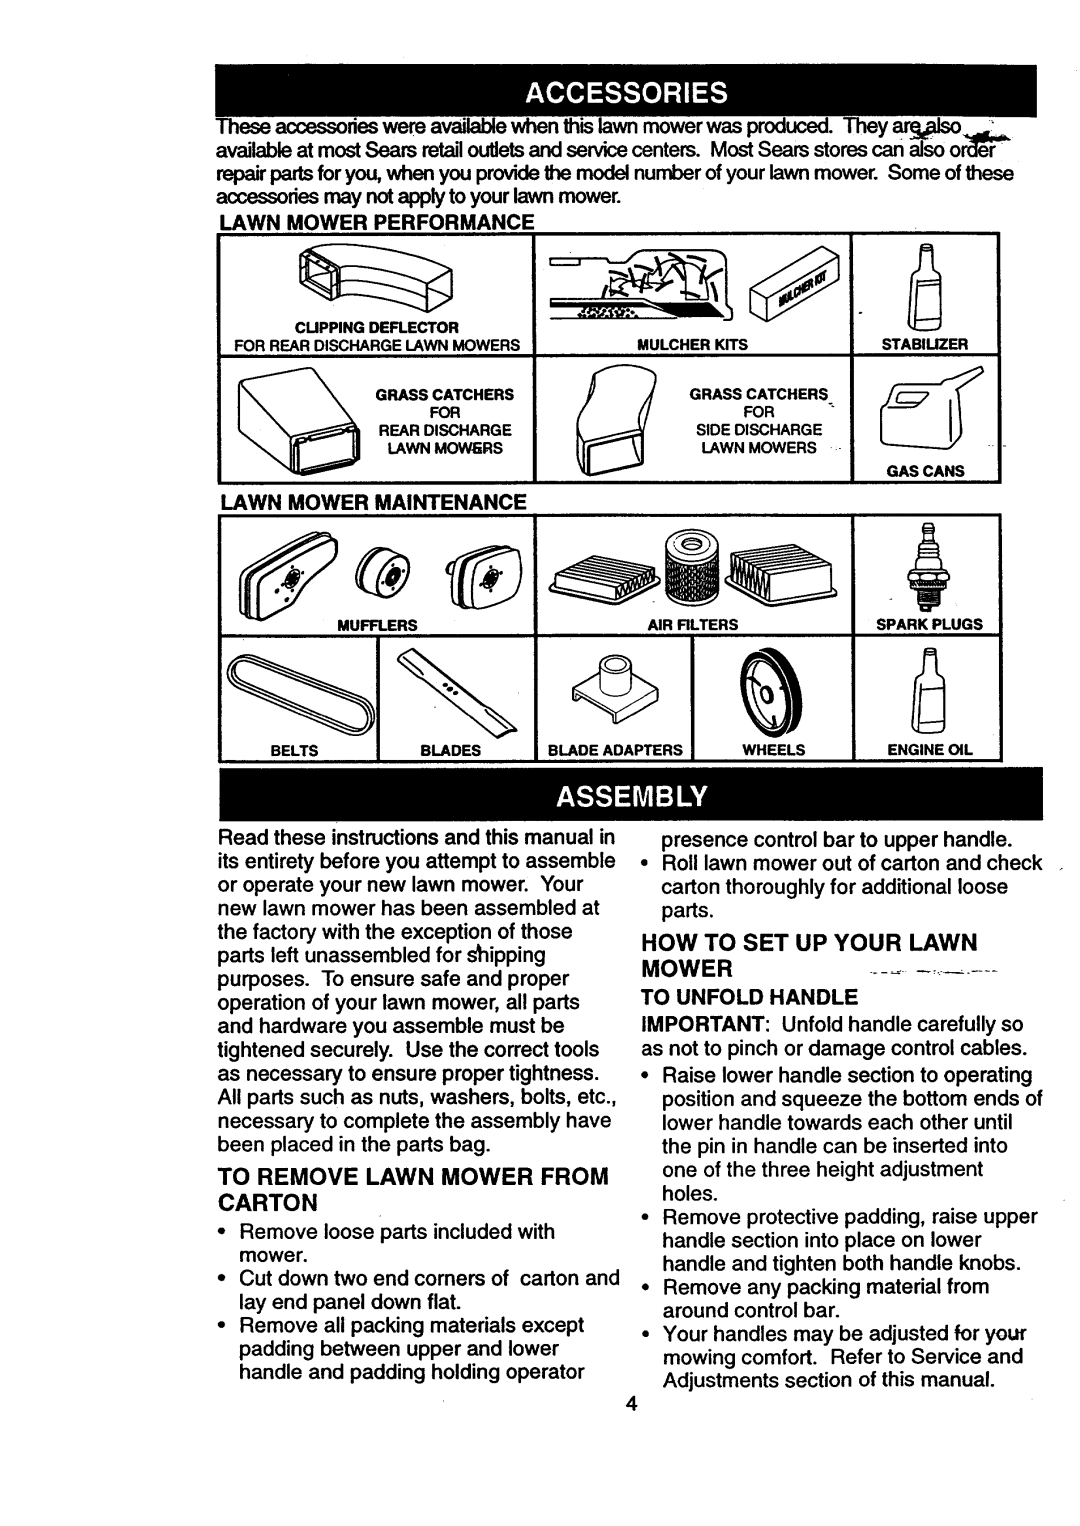 Craftsman 917.377631 owner manual To Remove Lawn Mower From Carton, How To Set Up Your Lawn 